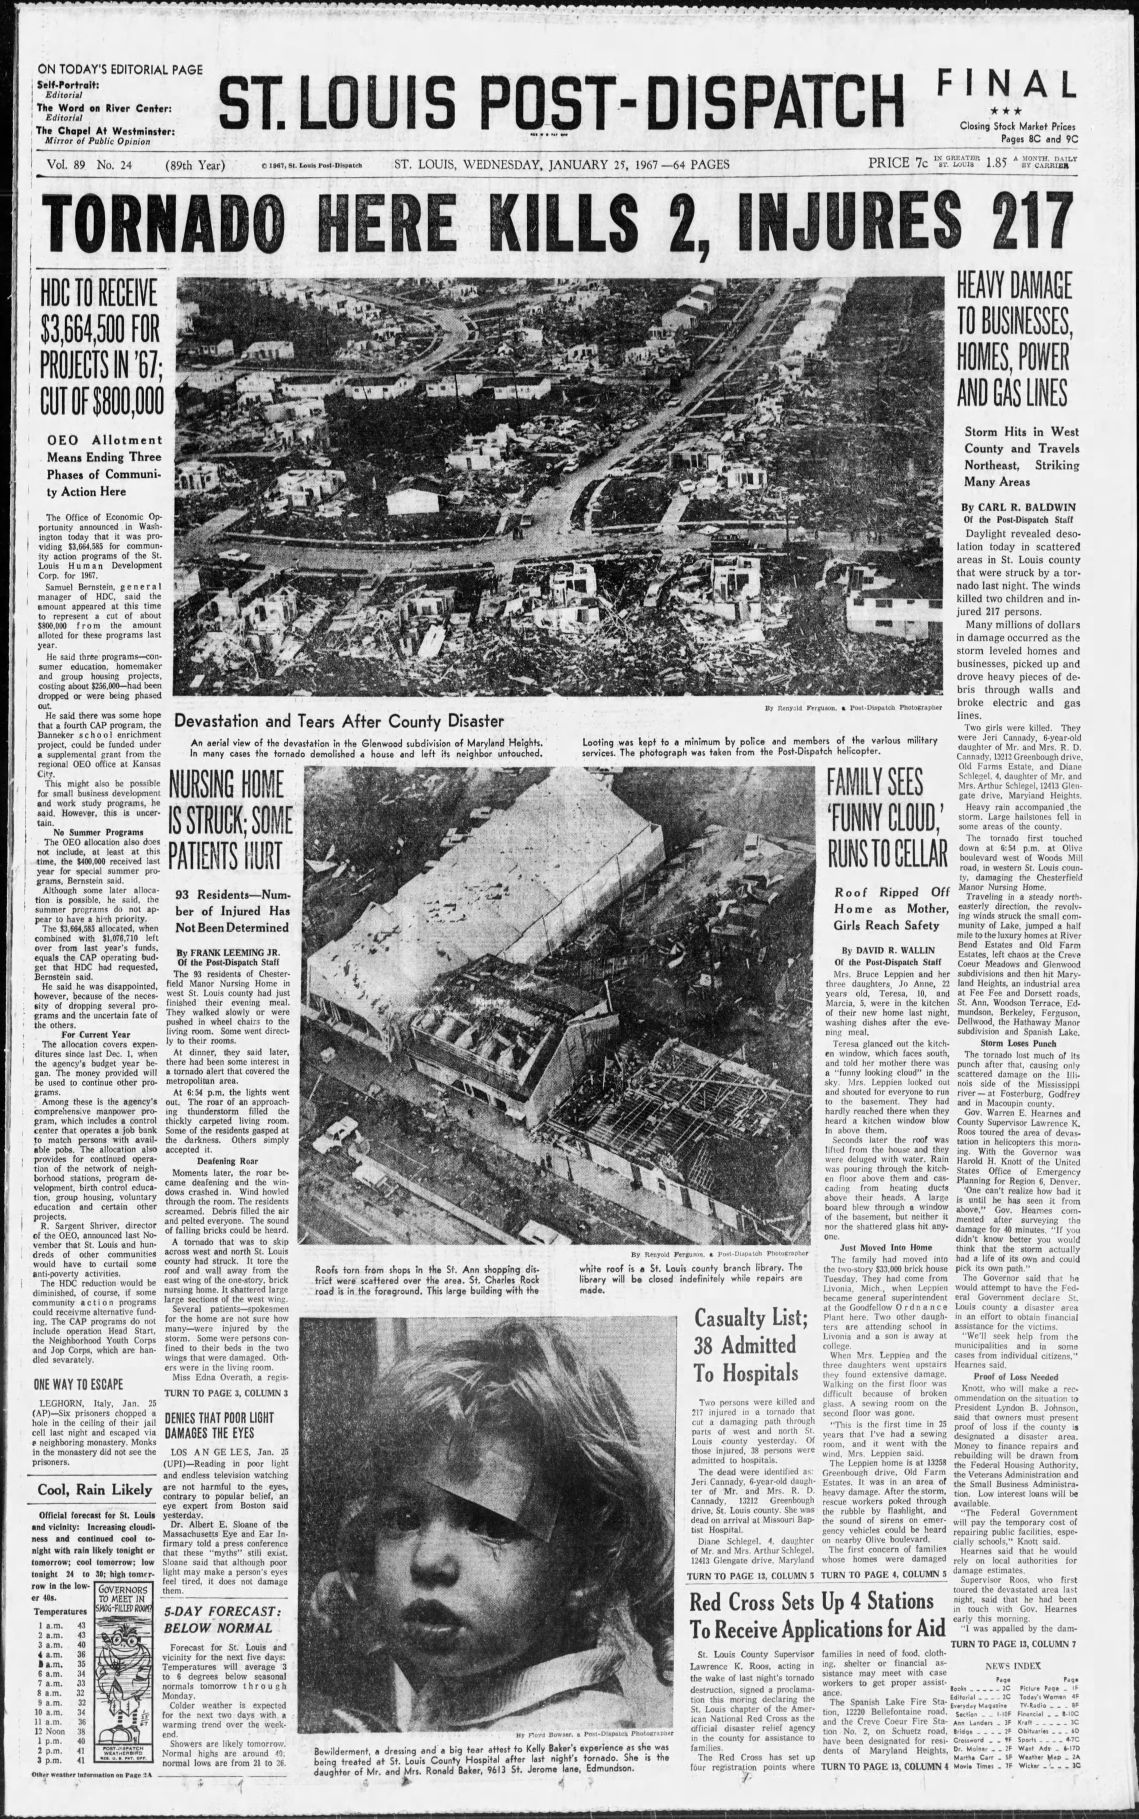 Post-Dispatch pages: The Tornado of 1967 | Post-Dispatch Archives | www.bagssaleusa.com